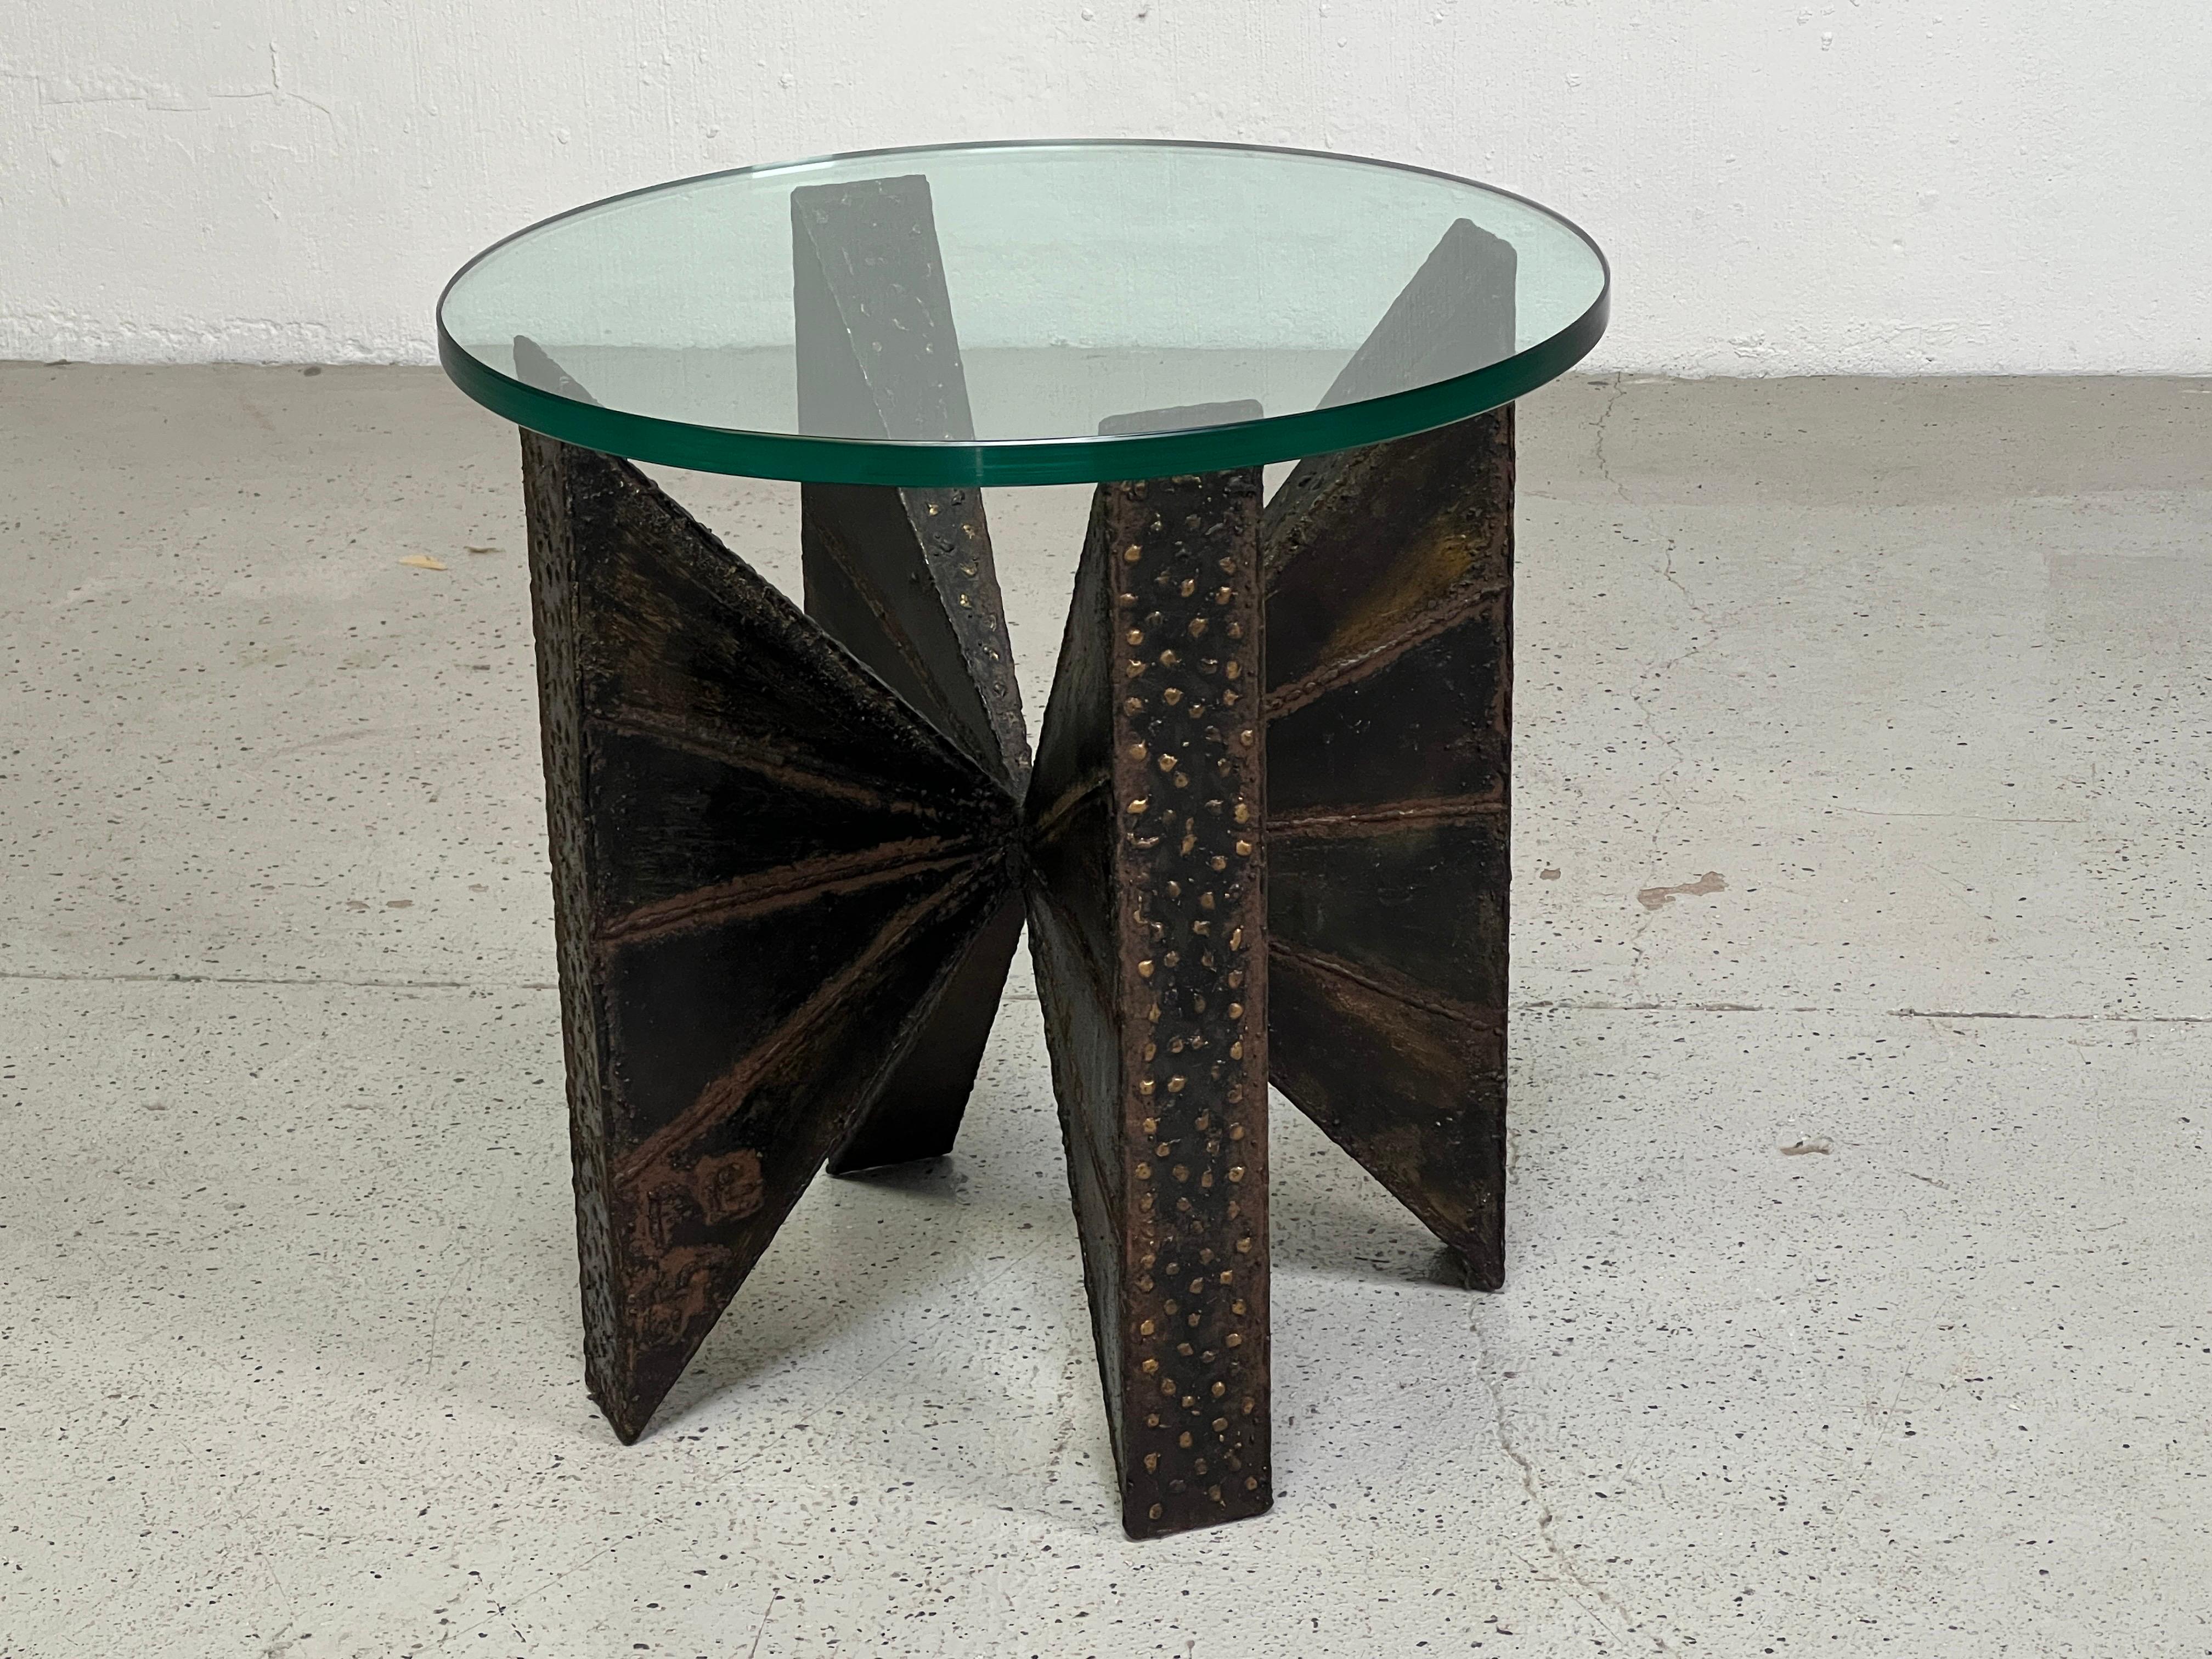 A sculpted metal side table designed by Paul Evans studio for Directional. Signed and dated 1967.